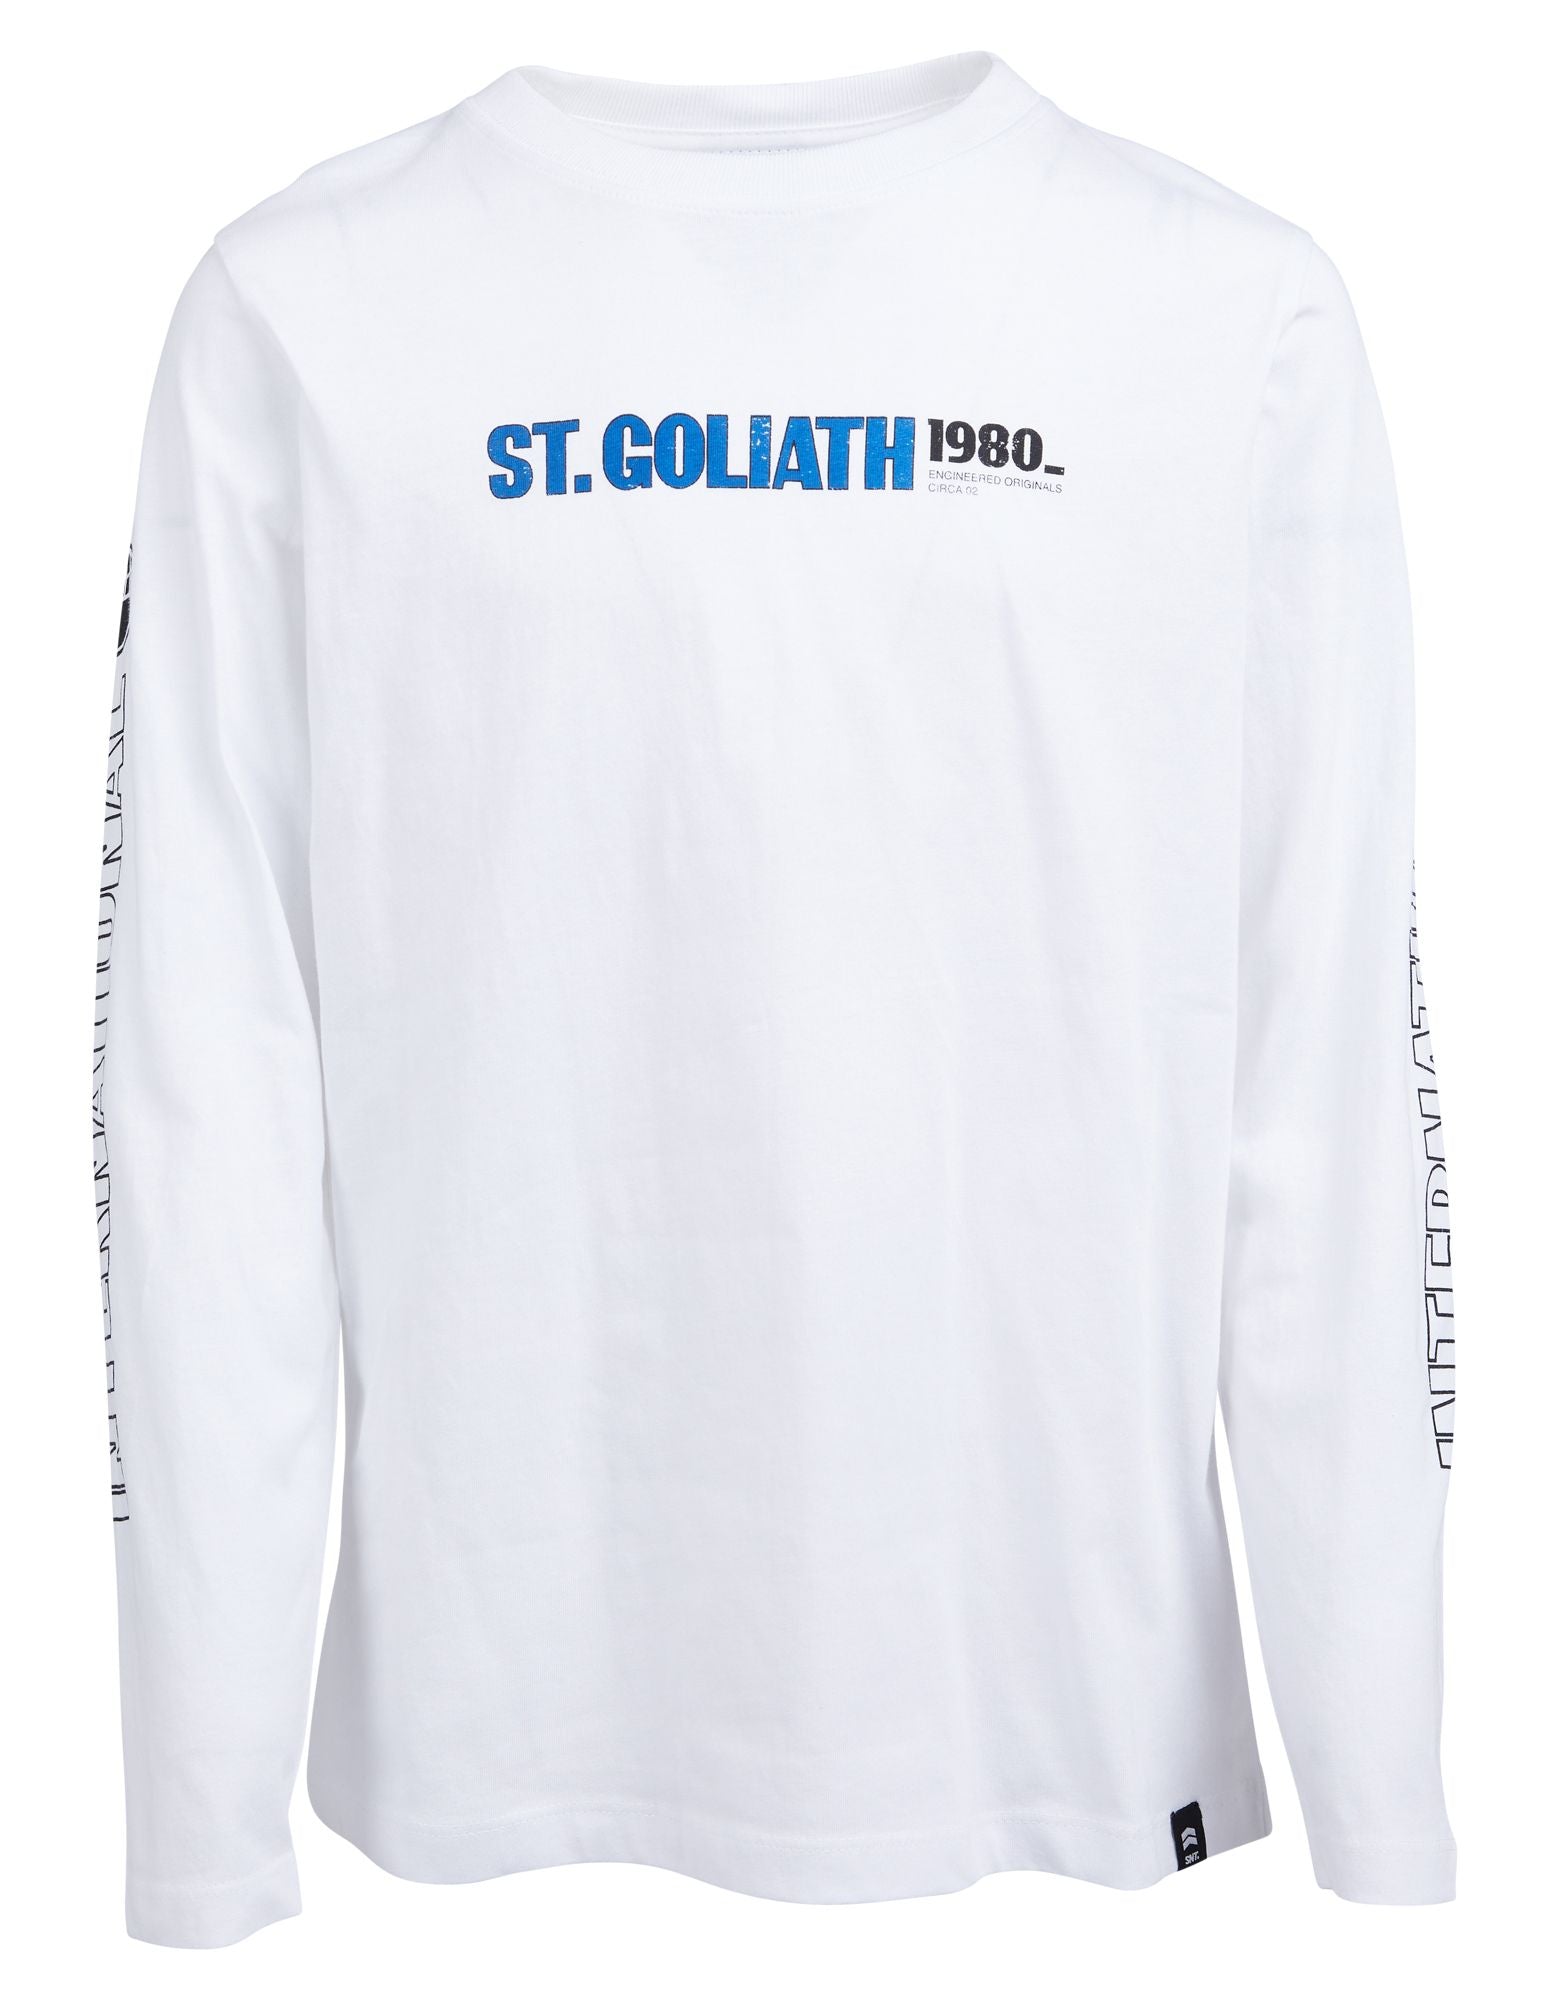 St Goliath - Charger Long Sleeve Tee